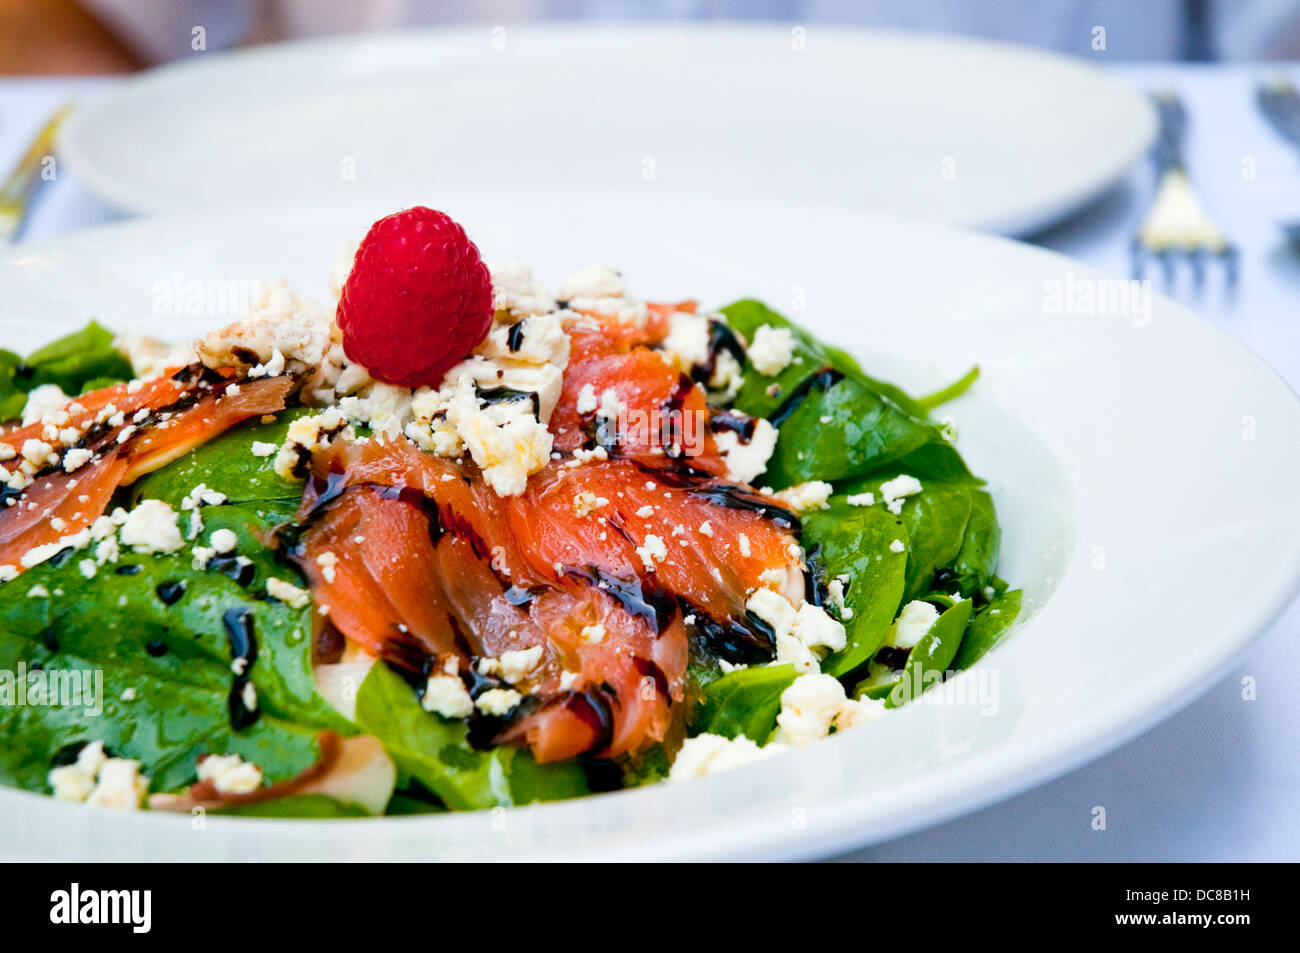 Summer salad: Spinach leaves, smoked salmon, cottage cheese with olive oil. Close view. Stock Photo